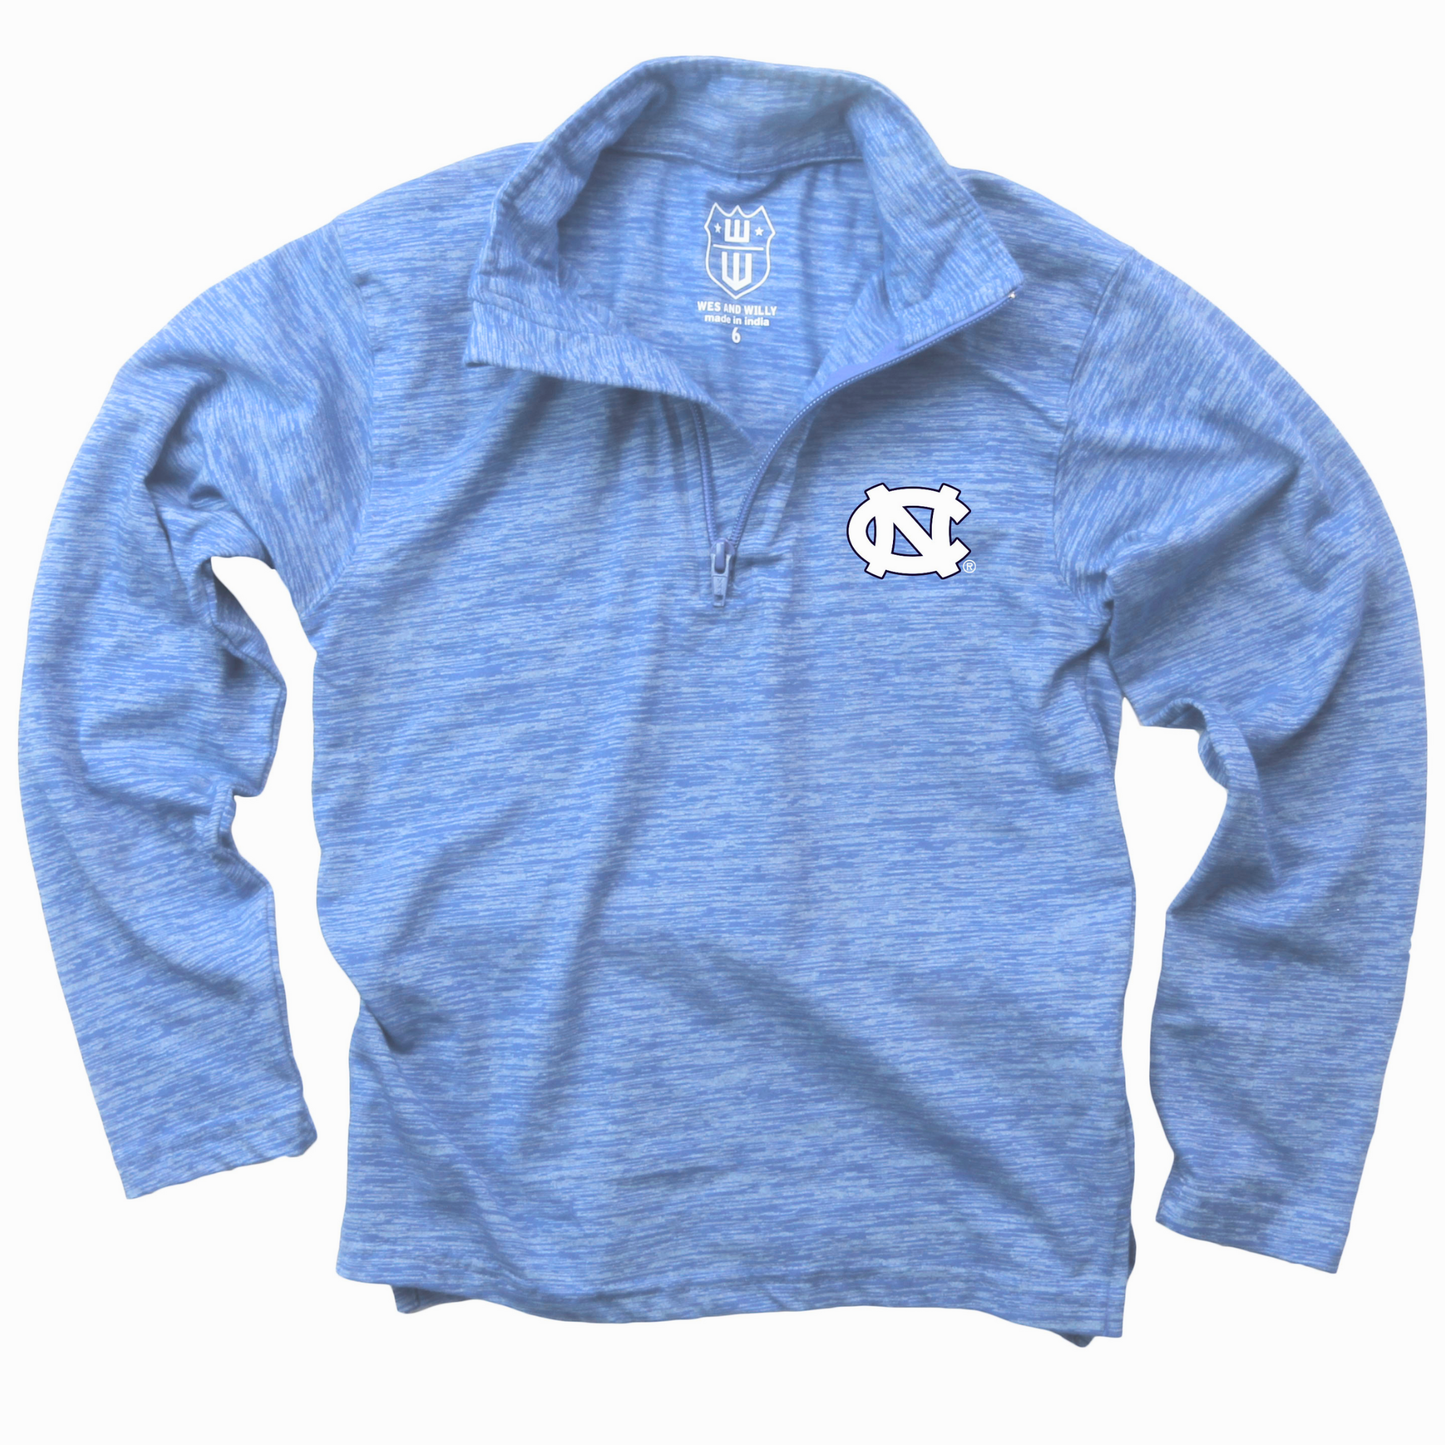 UNC Toddler Cloudy Yarn 1/4 Zip Pullover in Power Blue